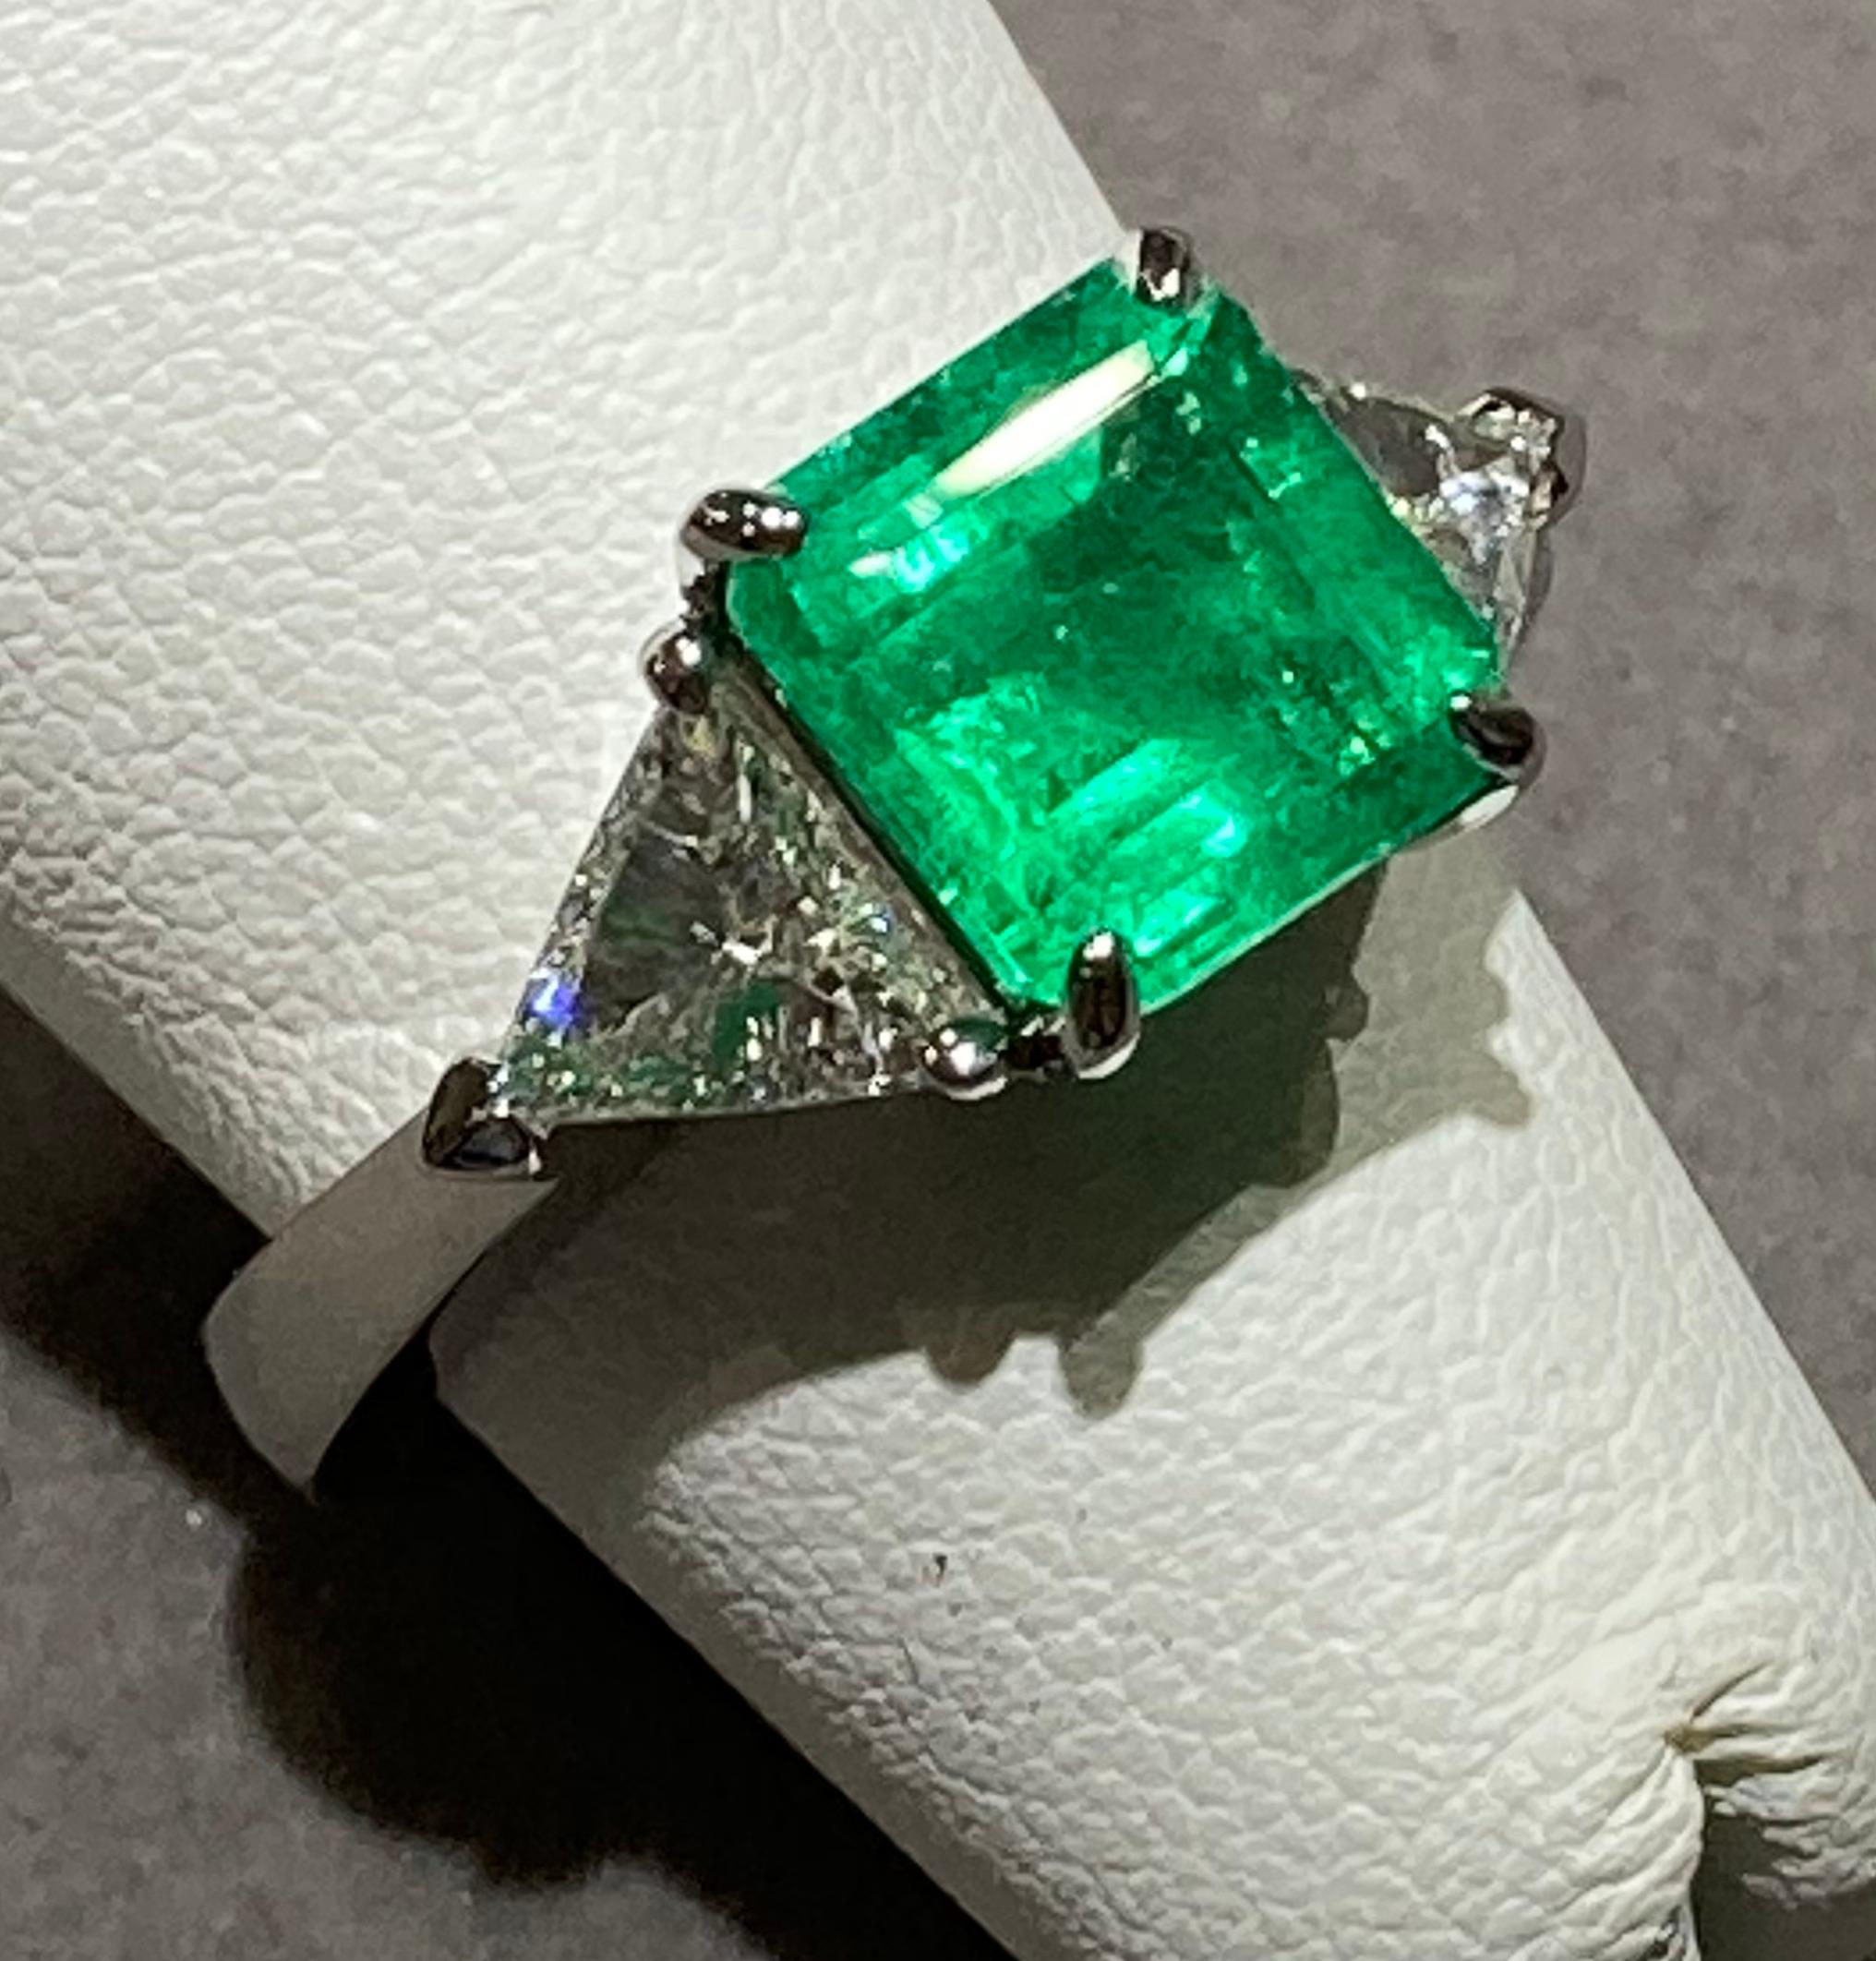 2.42ct Columbian emerald set along with two trillion cut diamonds of SI1-2 clarity and F color that total a weight of 0.80cts.

